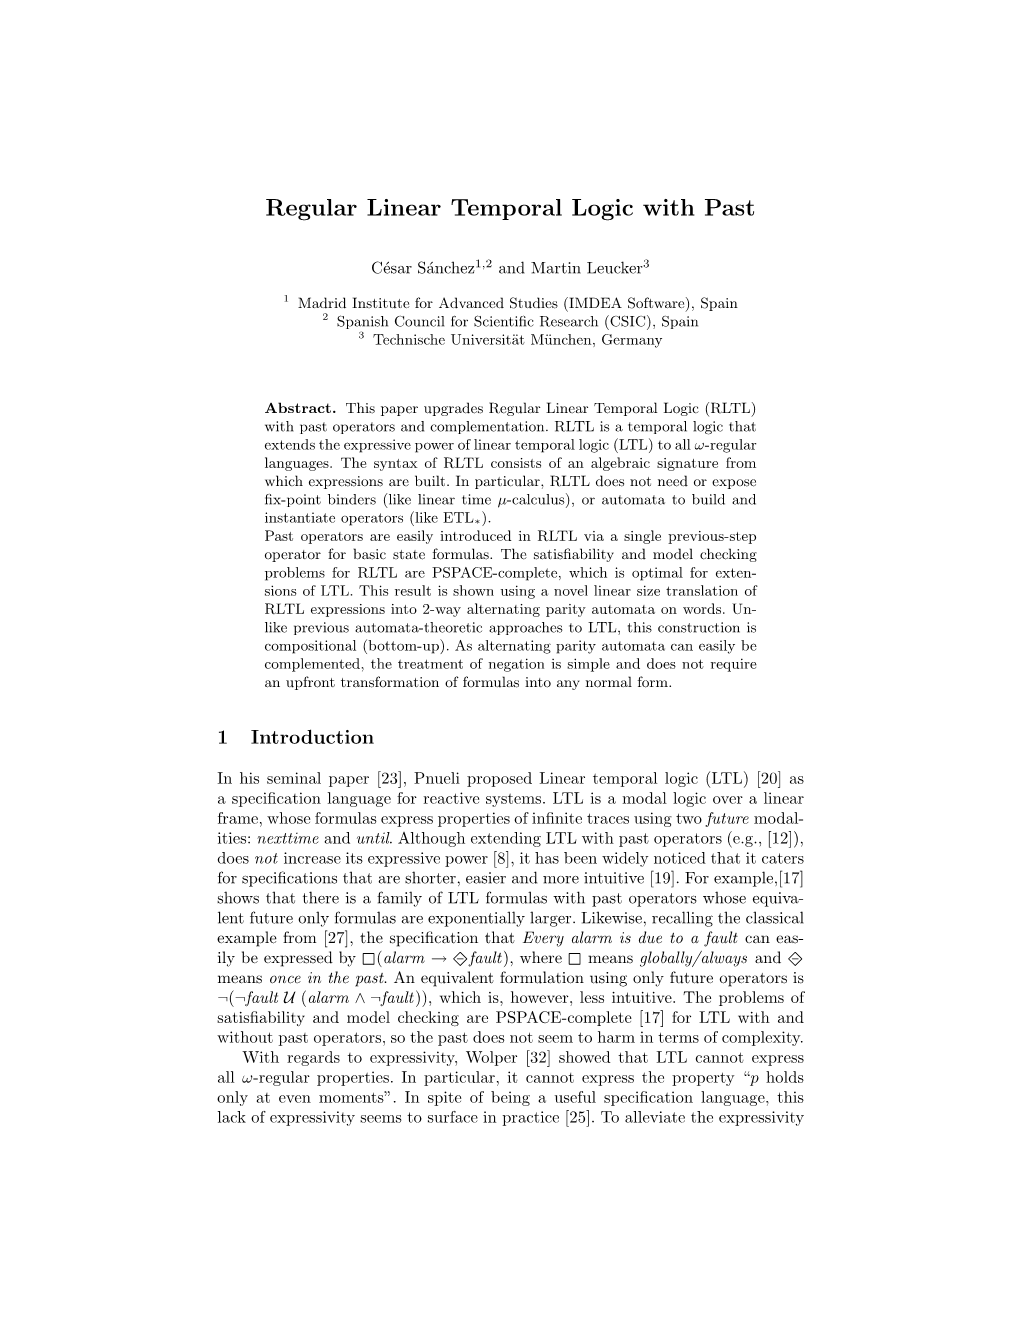 Regular Linear Temporal Logic with Past